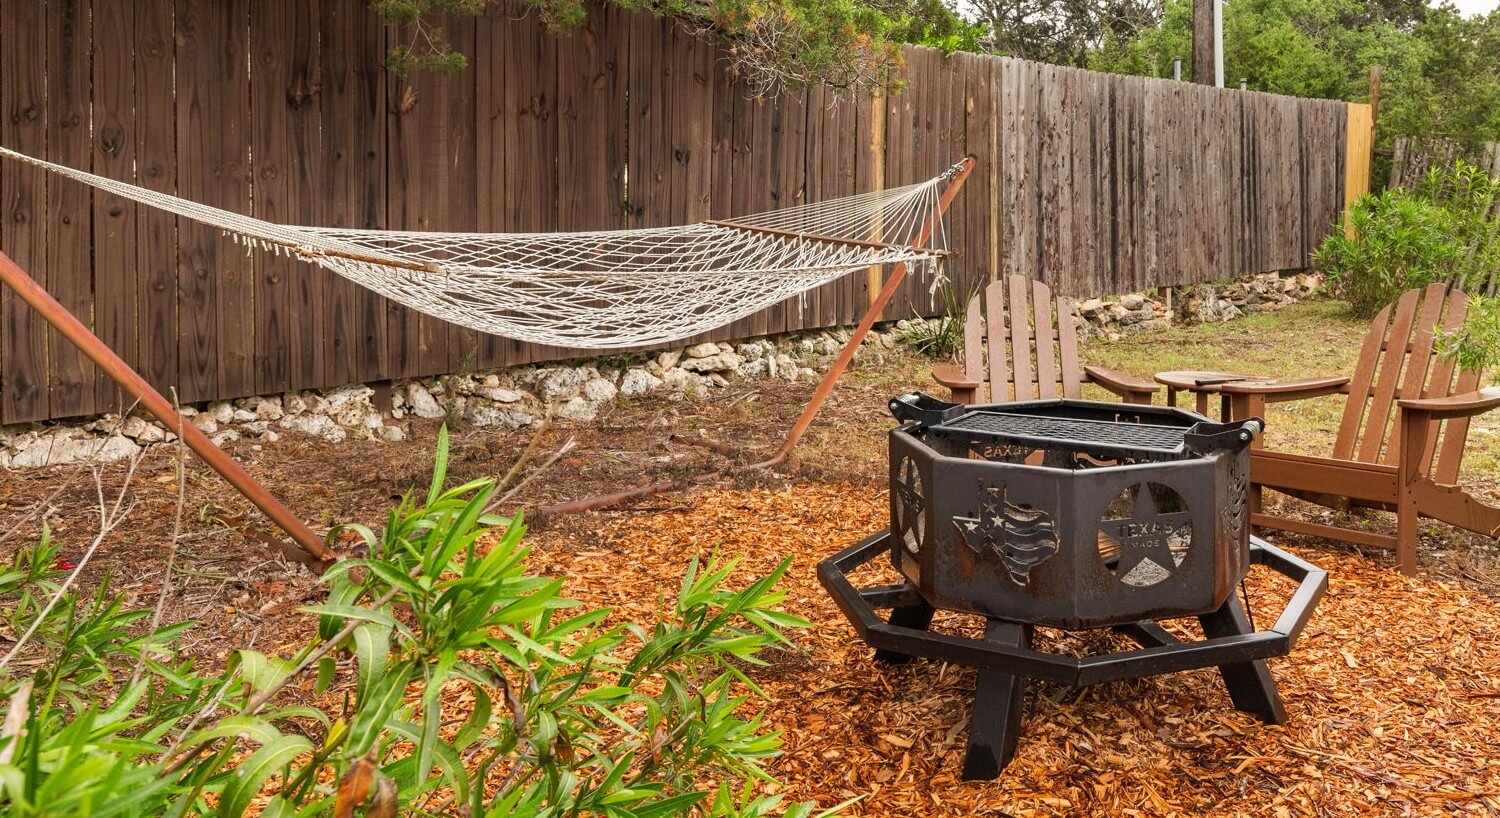 Outdoor area with a hammock, fire pit and two chairs.